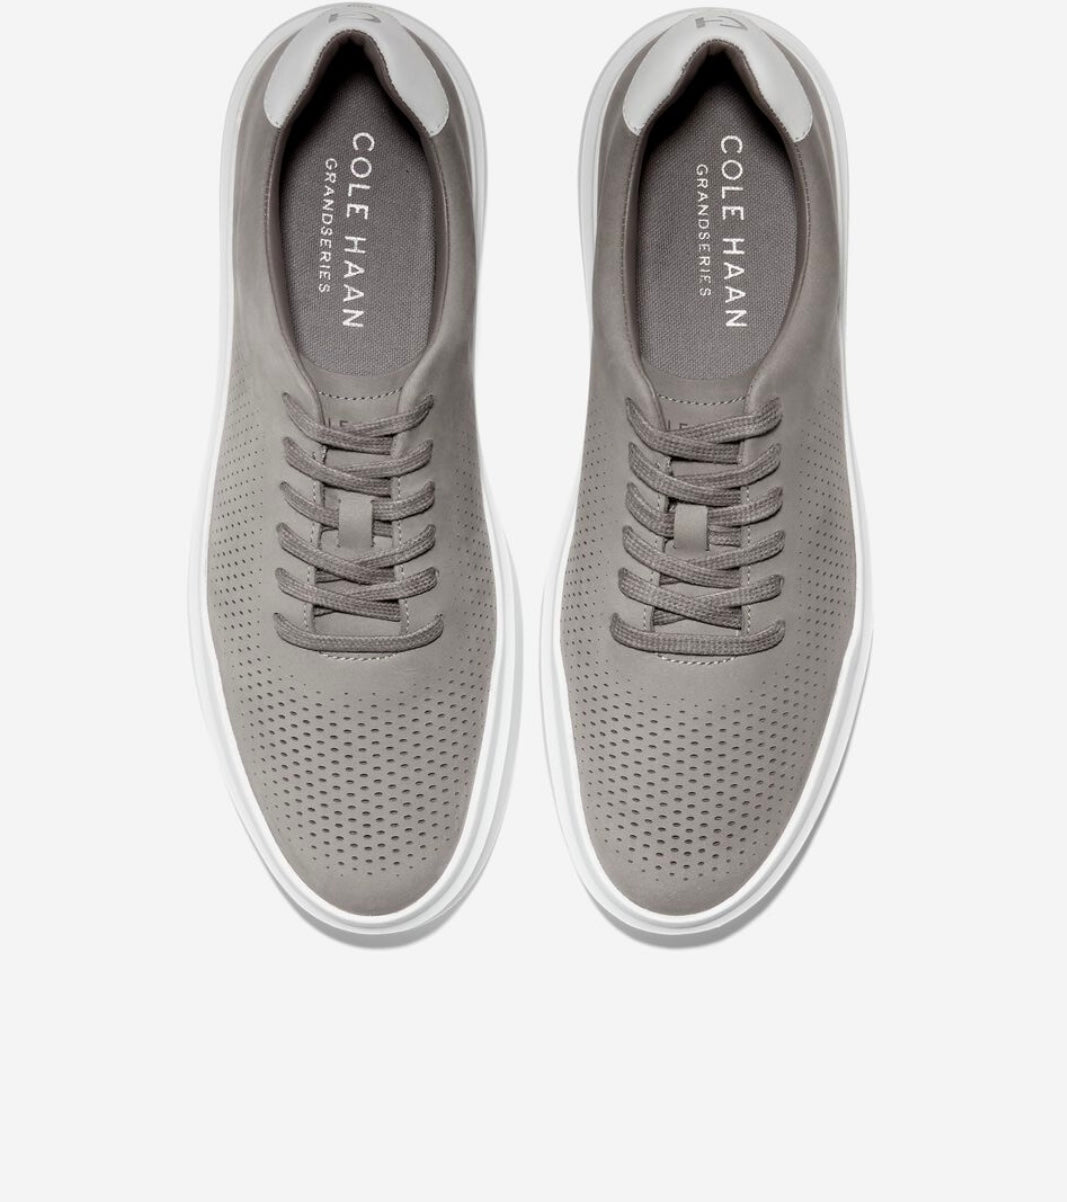 Cole Haan GrandPro Rally Laser Cut sneakers - Ironstone/Optic White